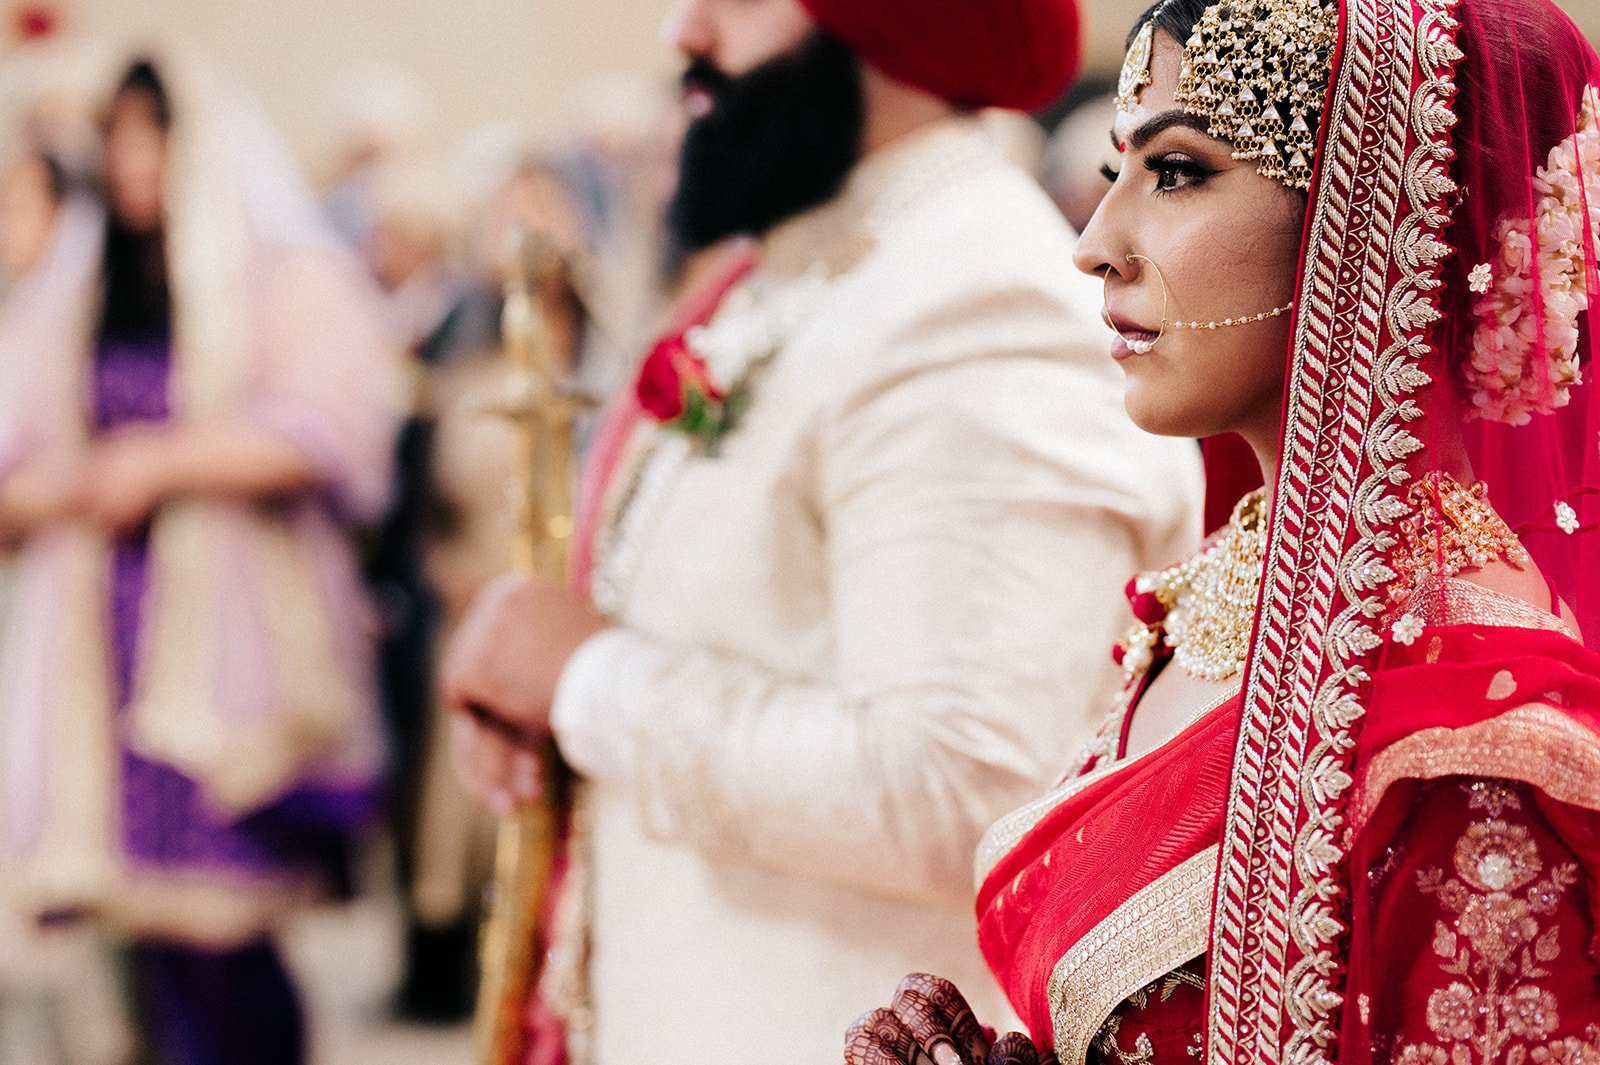 A bride looks forward thoughtfully during her Sikh wedding ceremonyl.